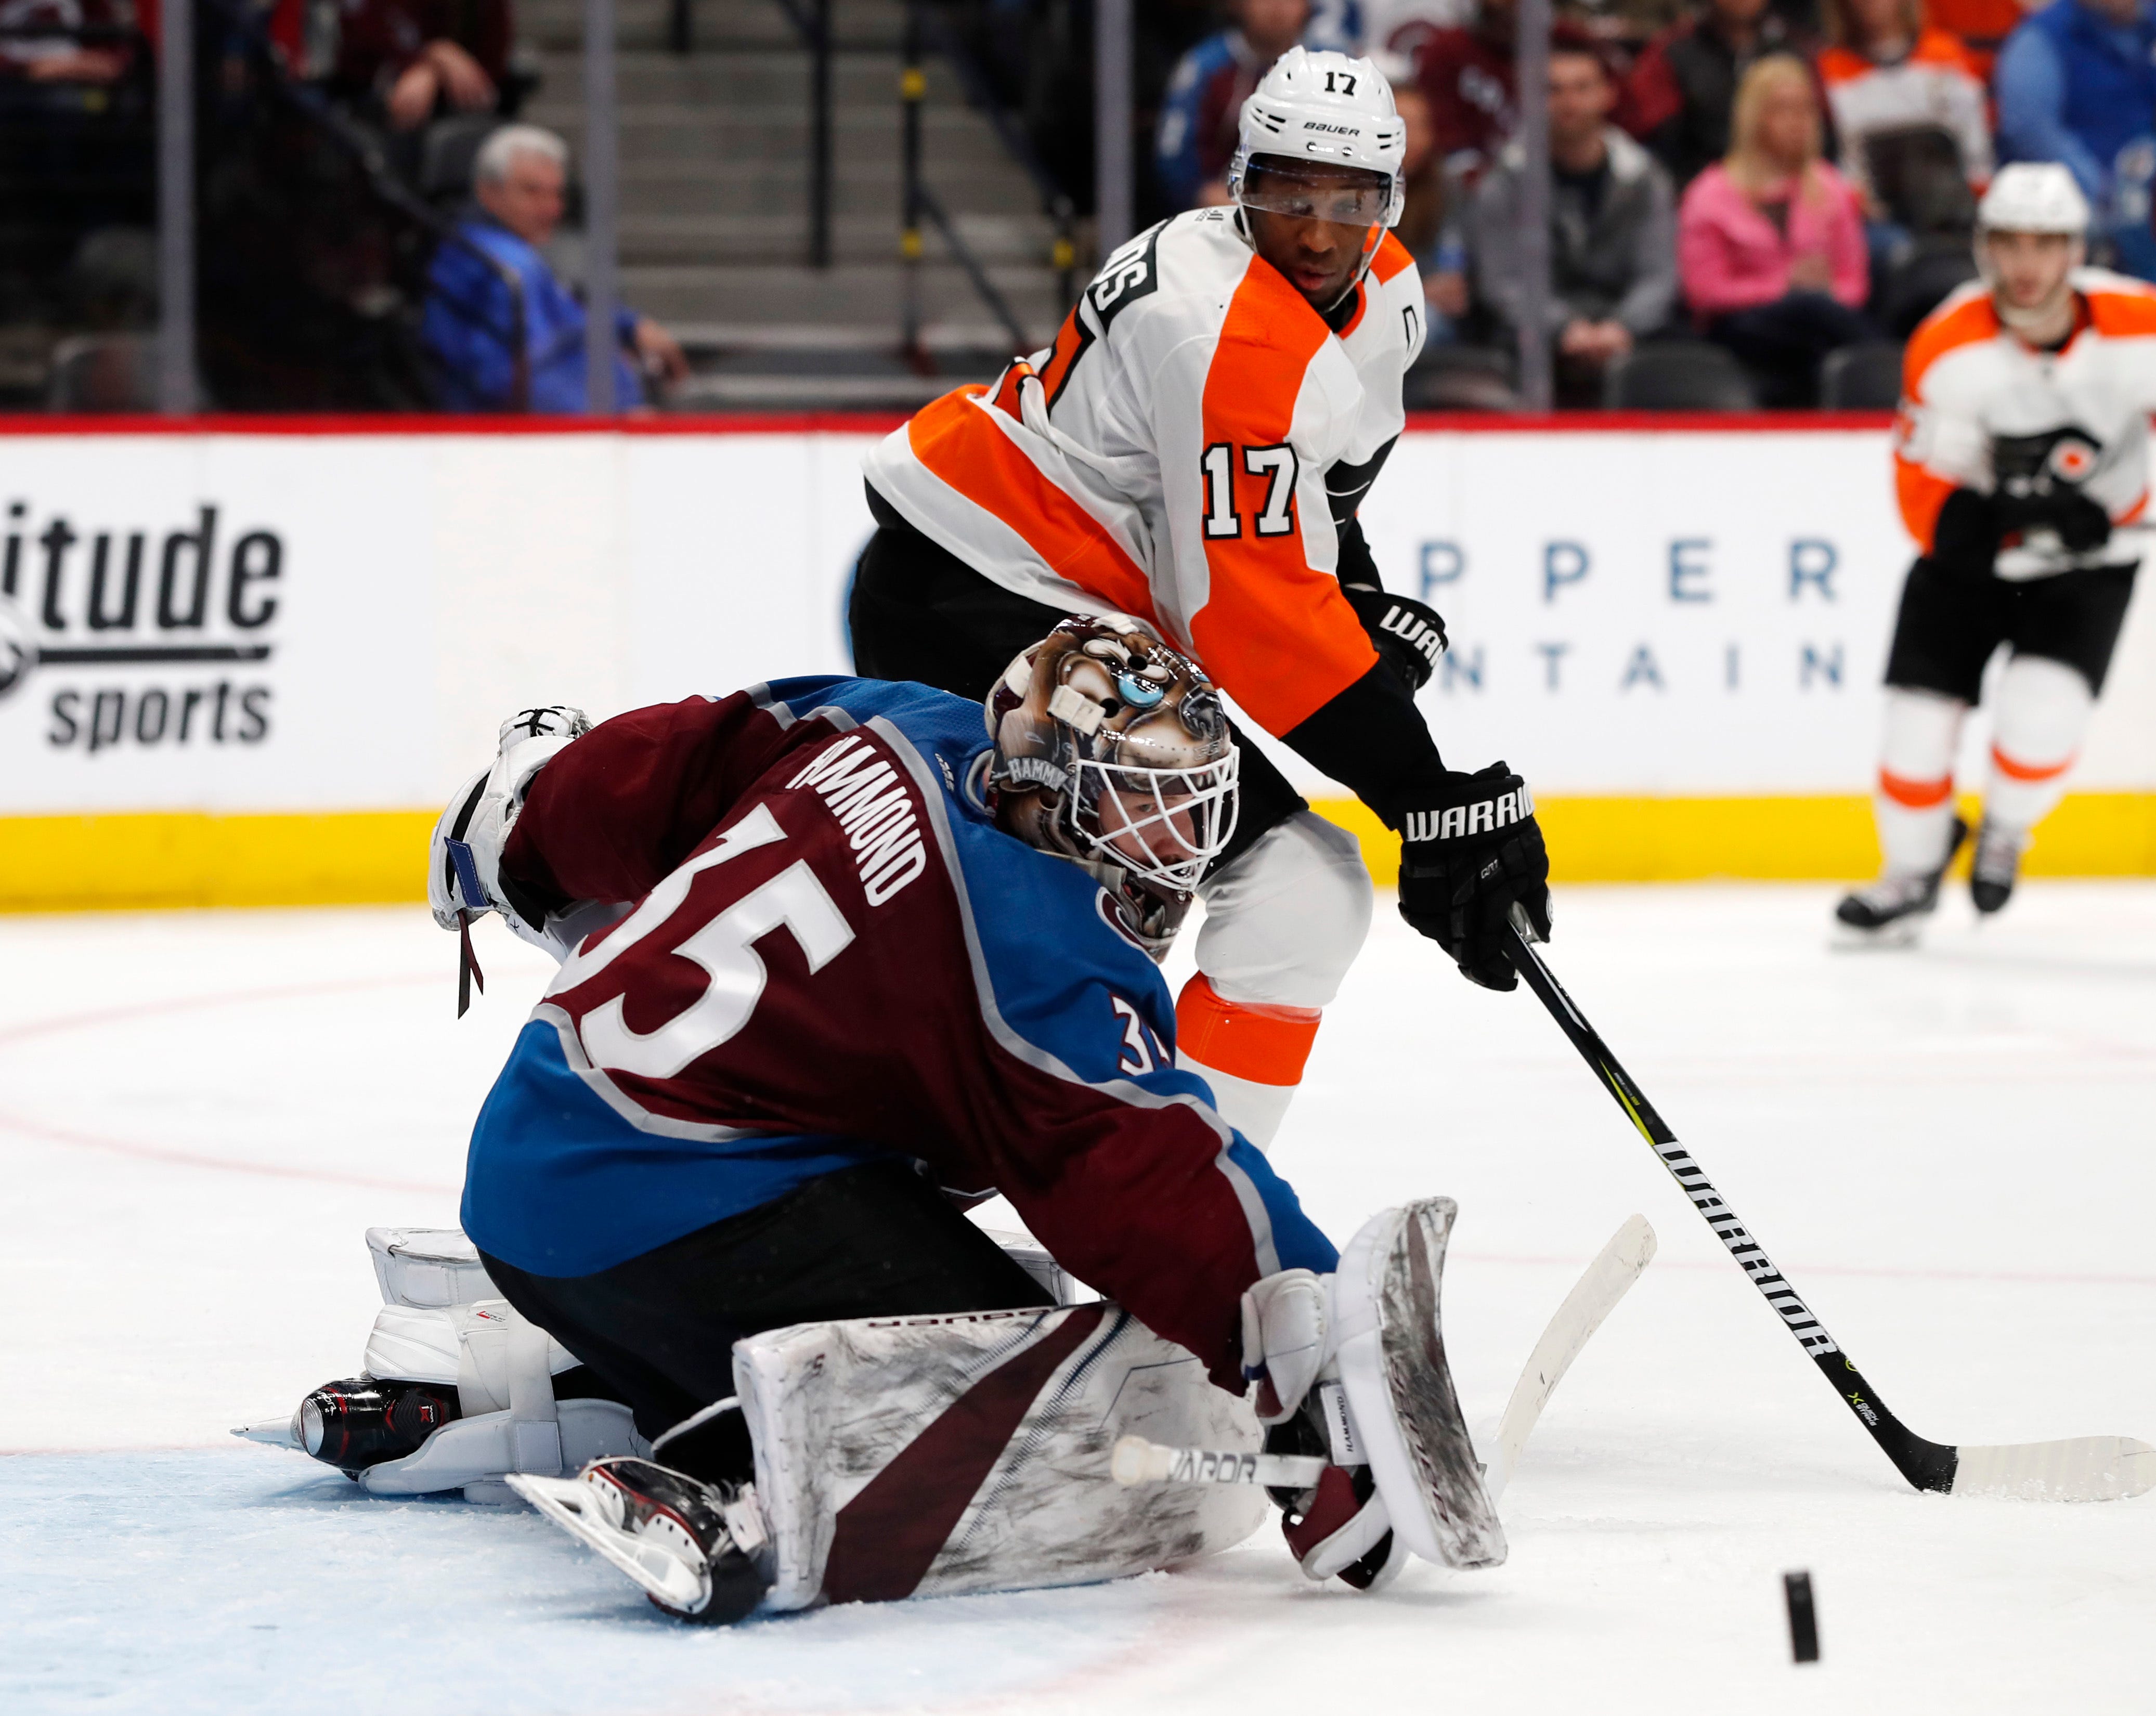 Provorov's goal, assist help Flyers to 2-1 win over Avs